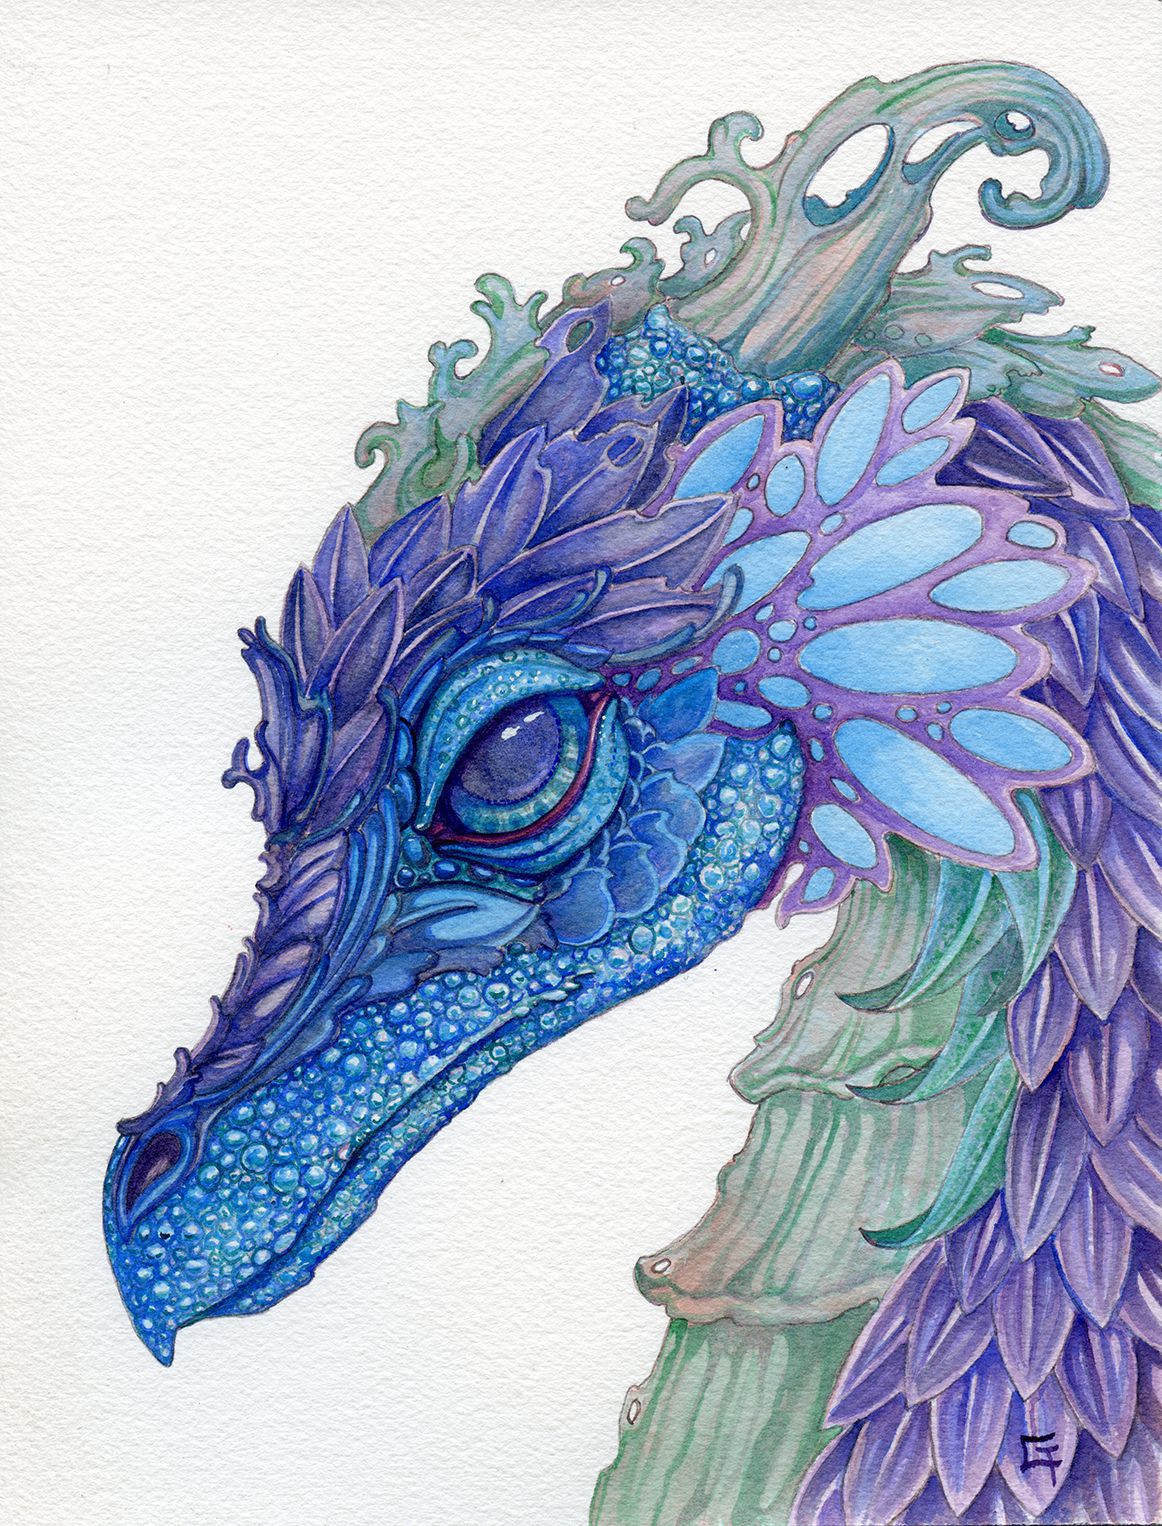 Unique And Wonderful Dragons Watercolors By Carrieann Truitt 13